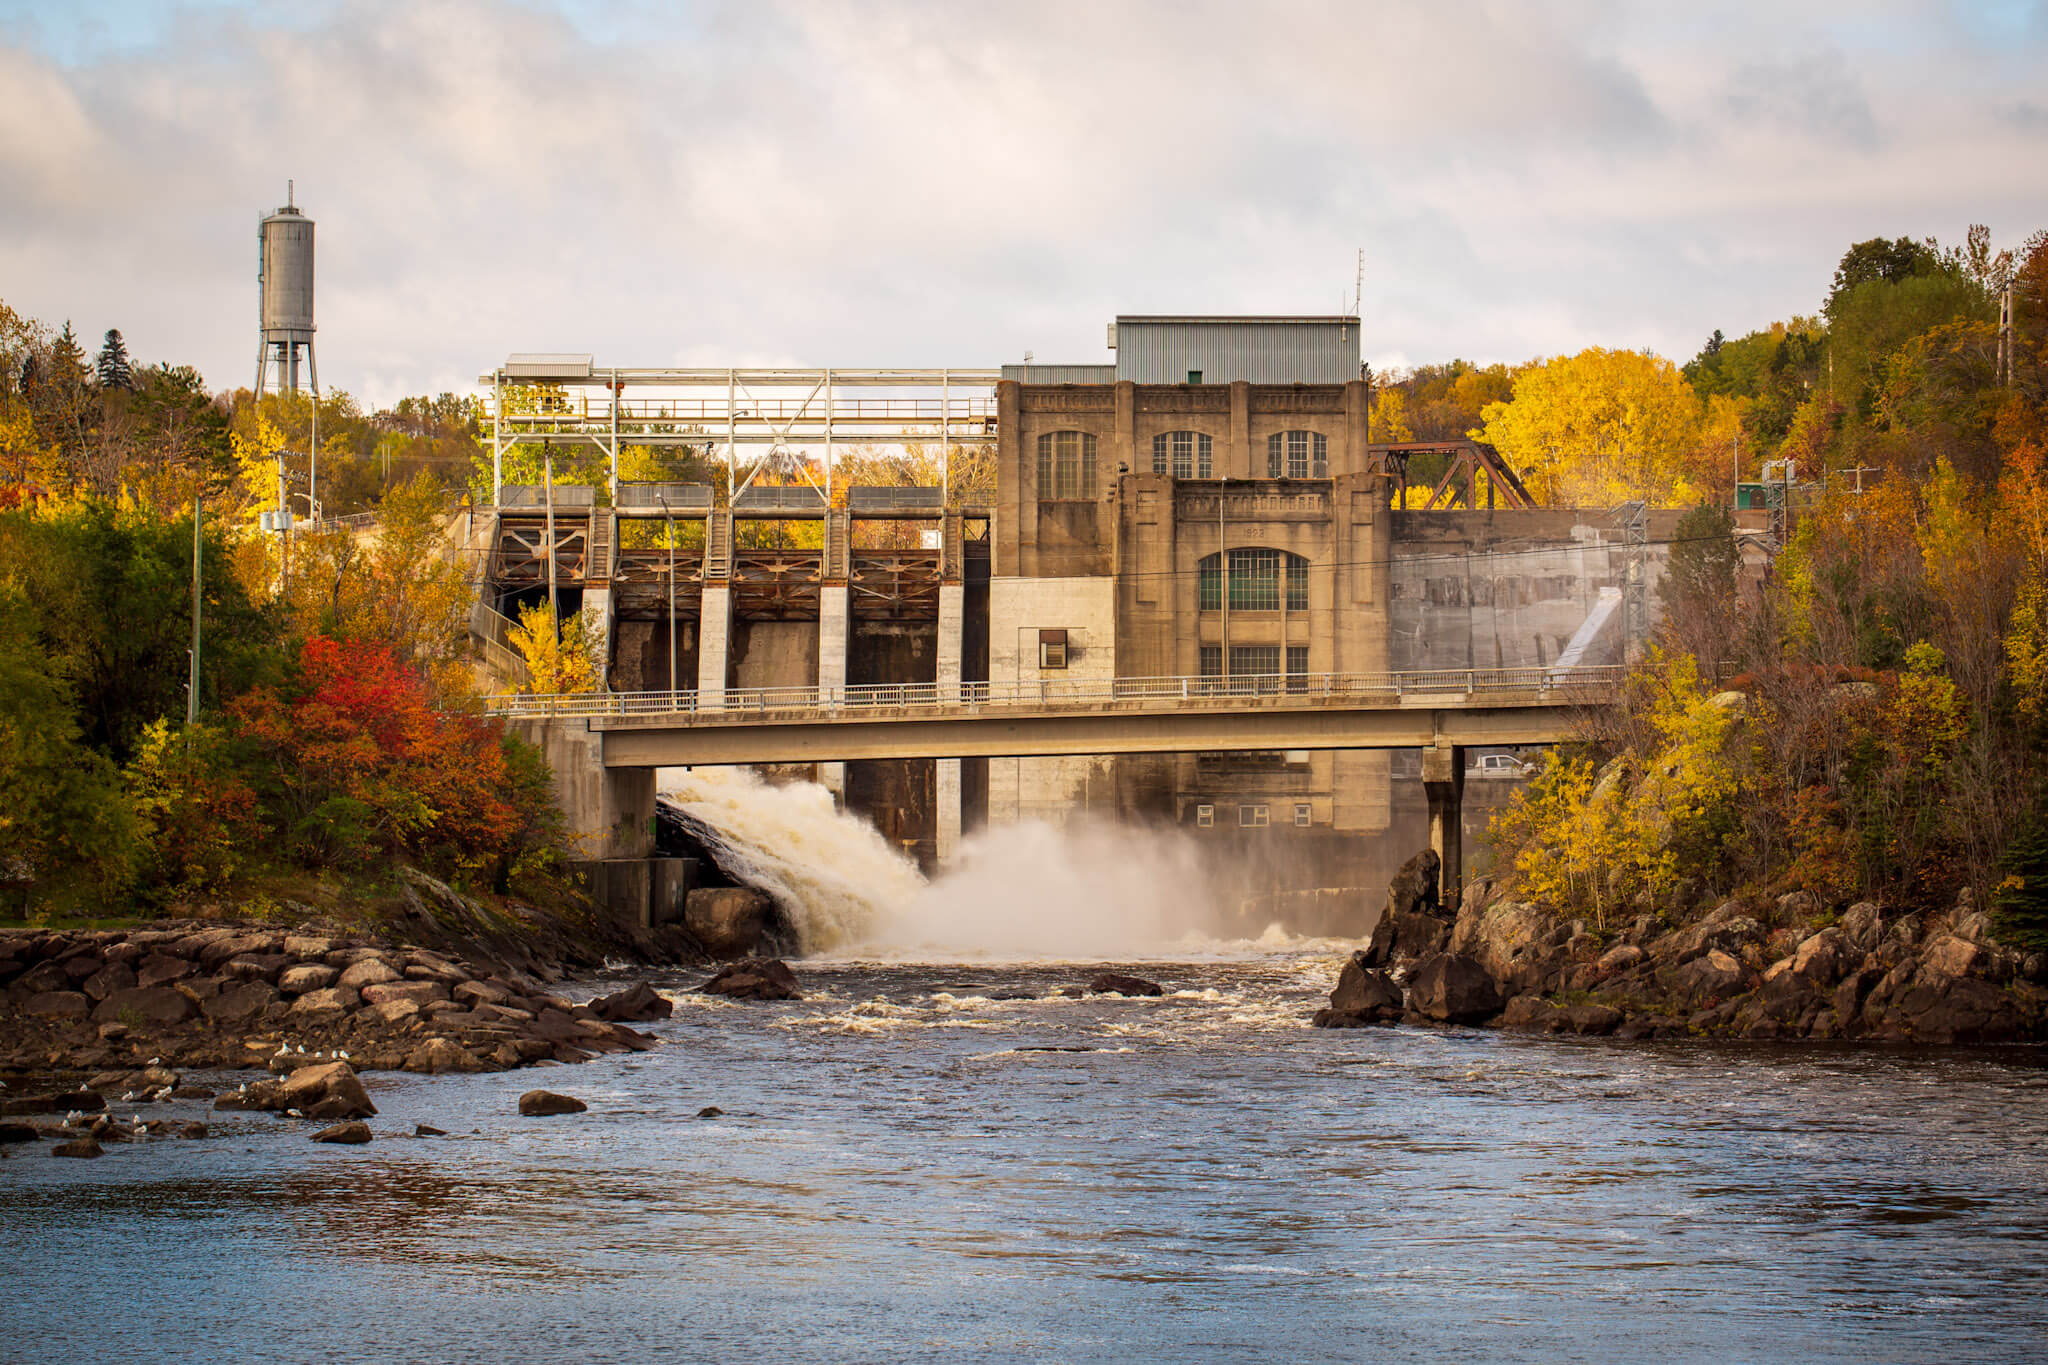 The Price hydroelectric powerhouse in Chicoutimi, Quebec